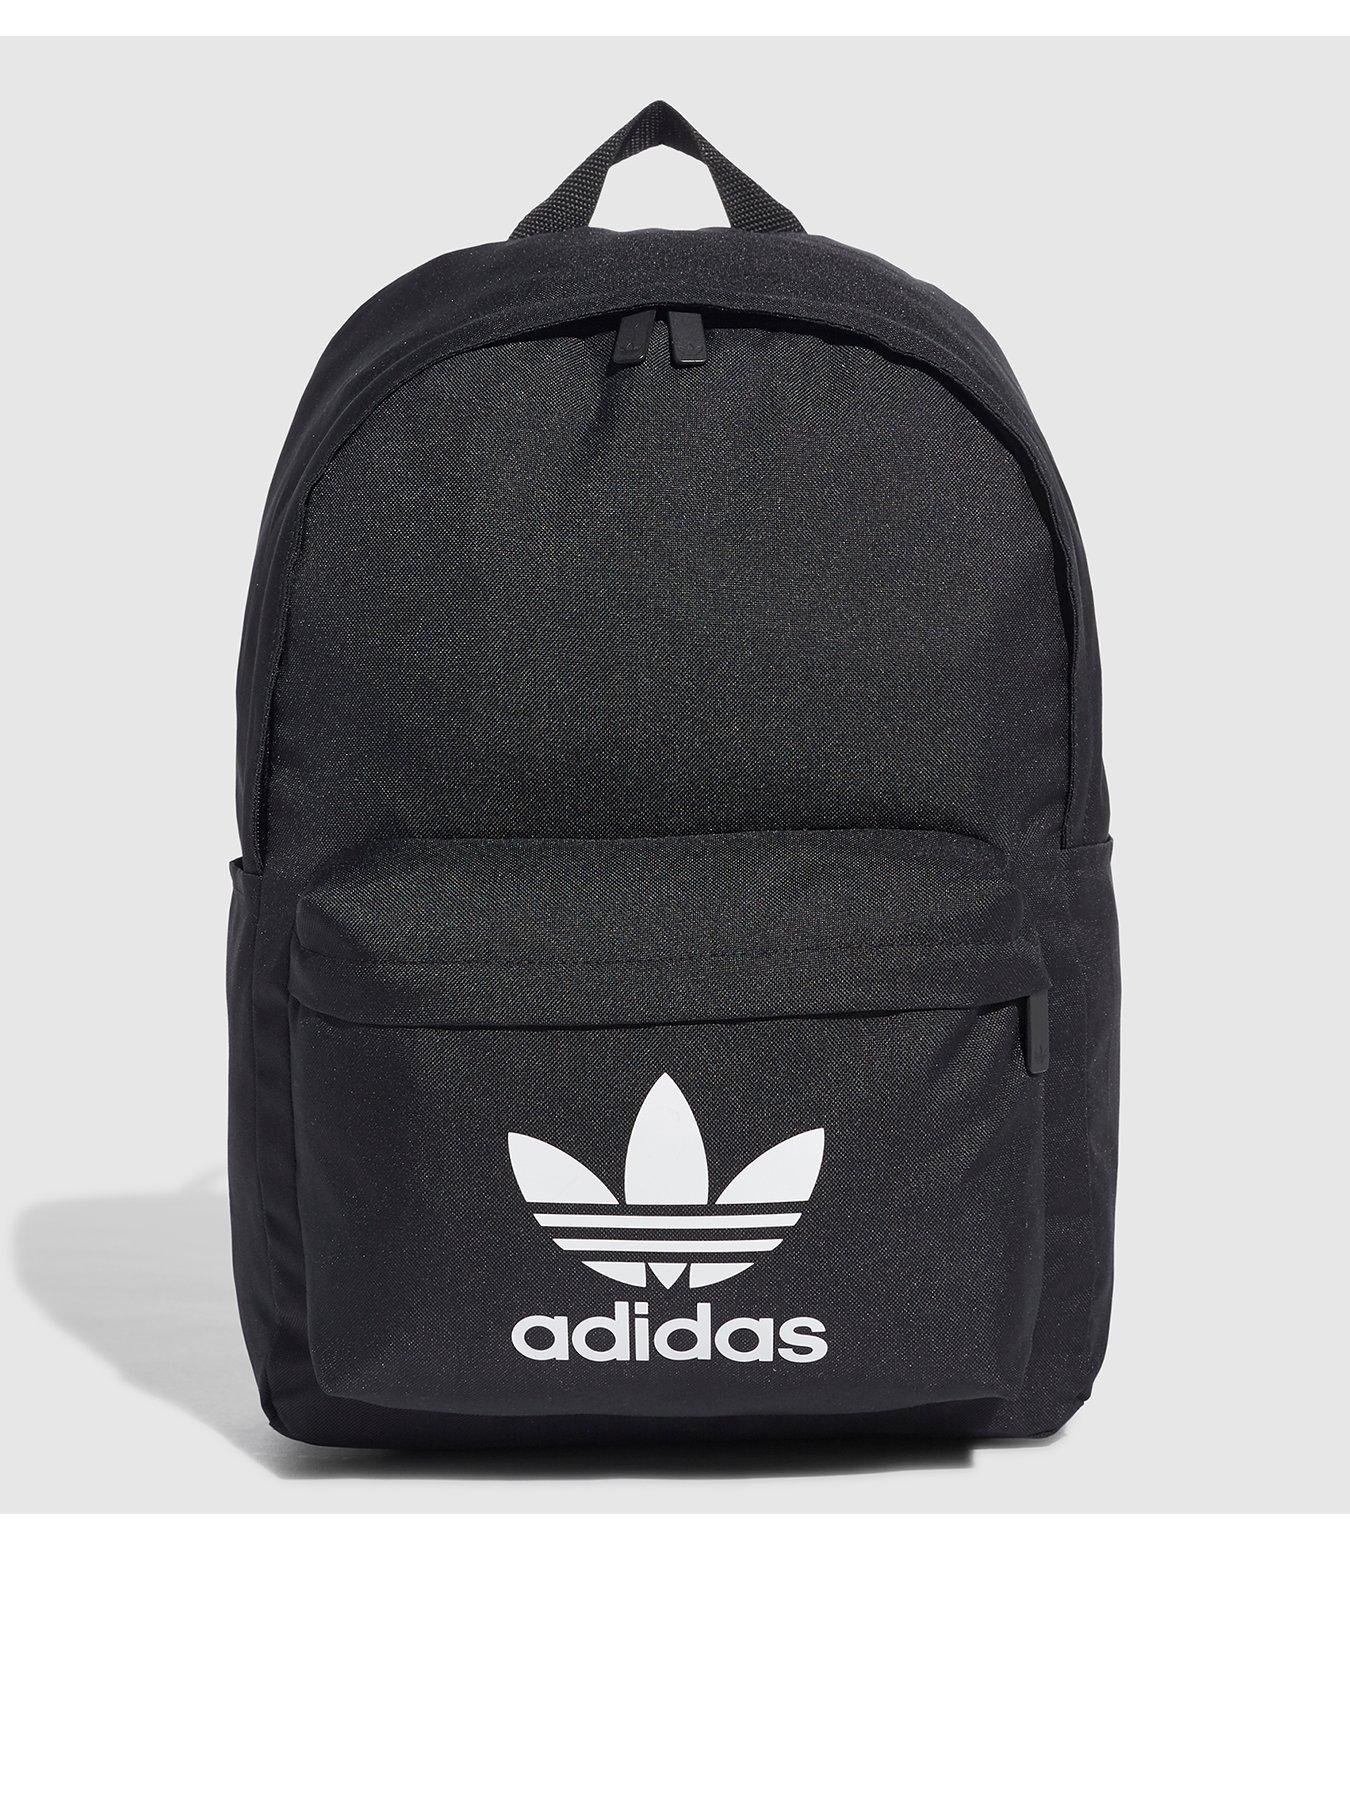 sports direct adidas backpack